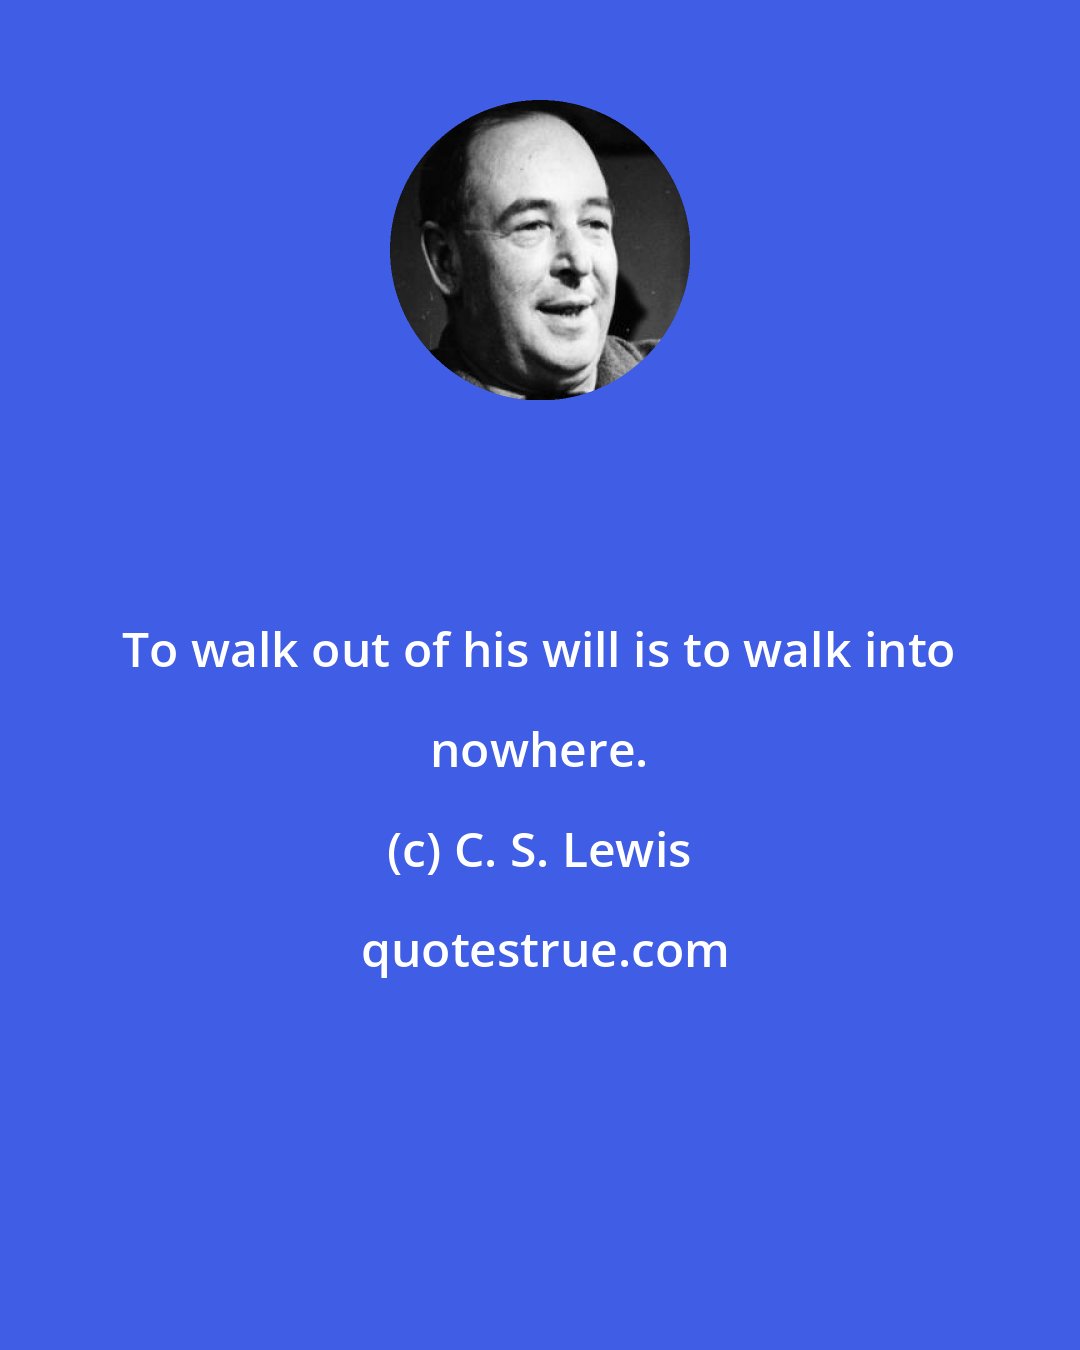 C. S. Lewis: To walk out of his will is to walk into nowhere.